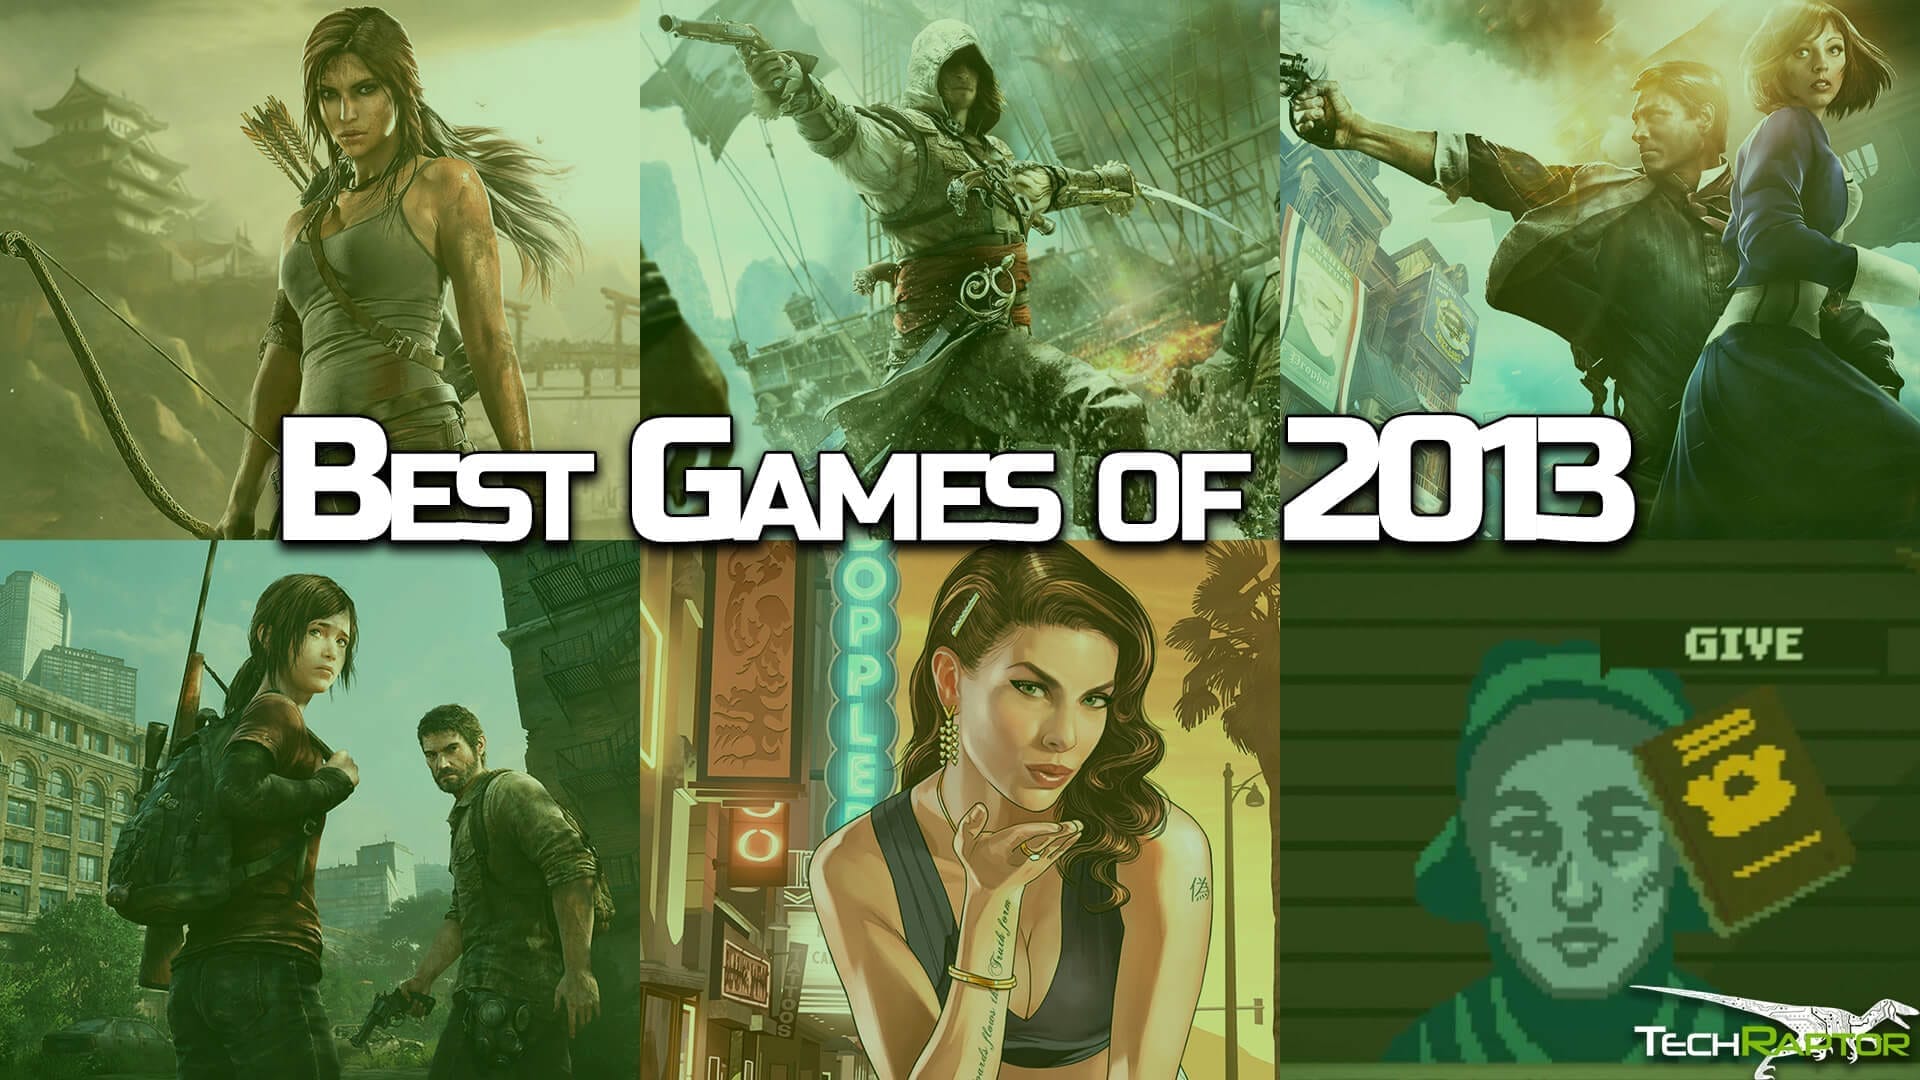 The 15 Best Games of 2013